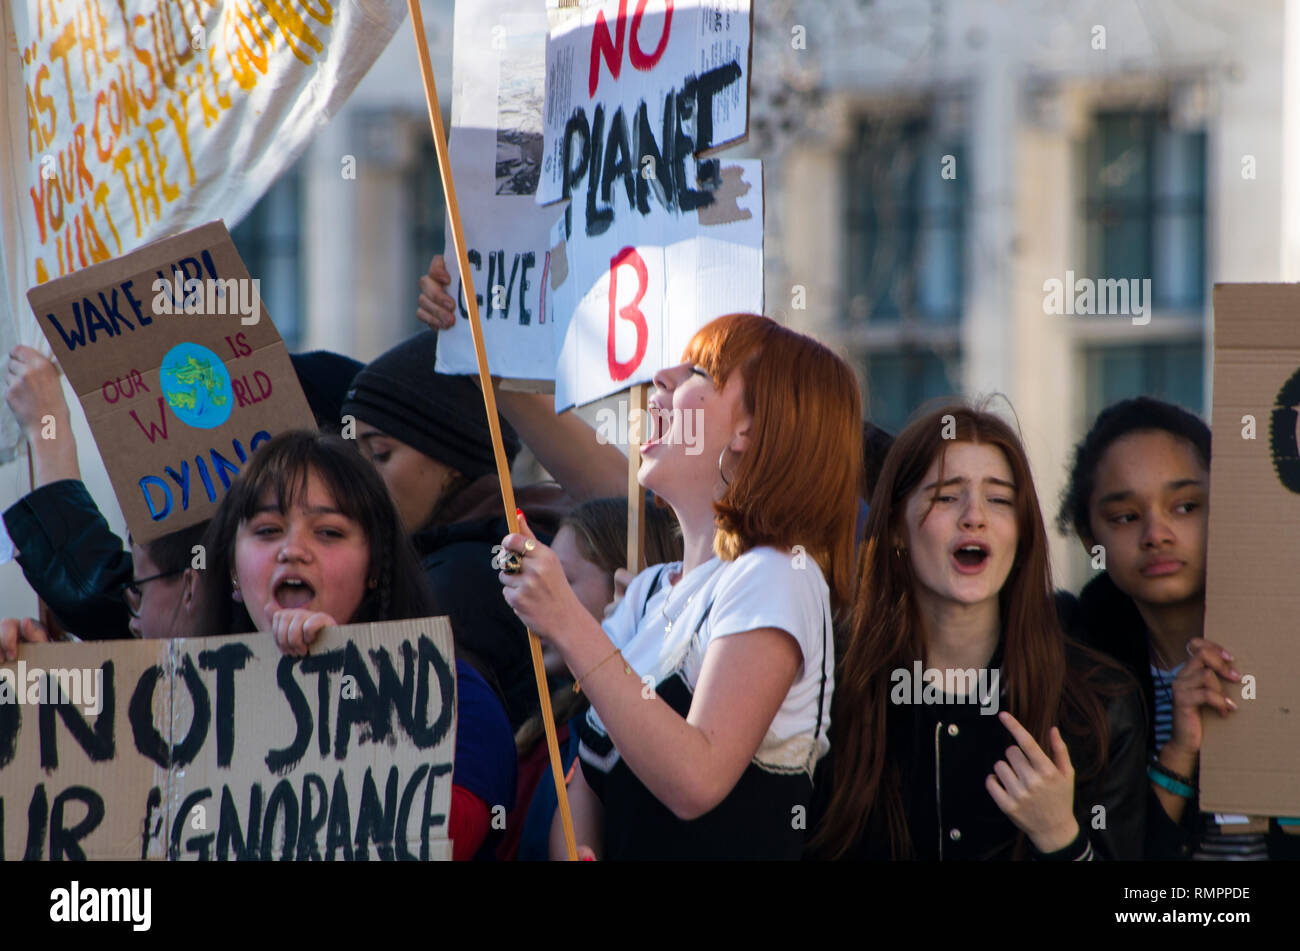 London, UK. 15 February 2019. Protesters at the London protests against Climate change in Westminster. Over a thousand school students walked out of school and gathered around Parliament Square to protest climate change. © Stuart Walden/ Alamy Live News Stock Photo